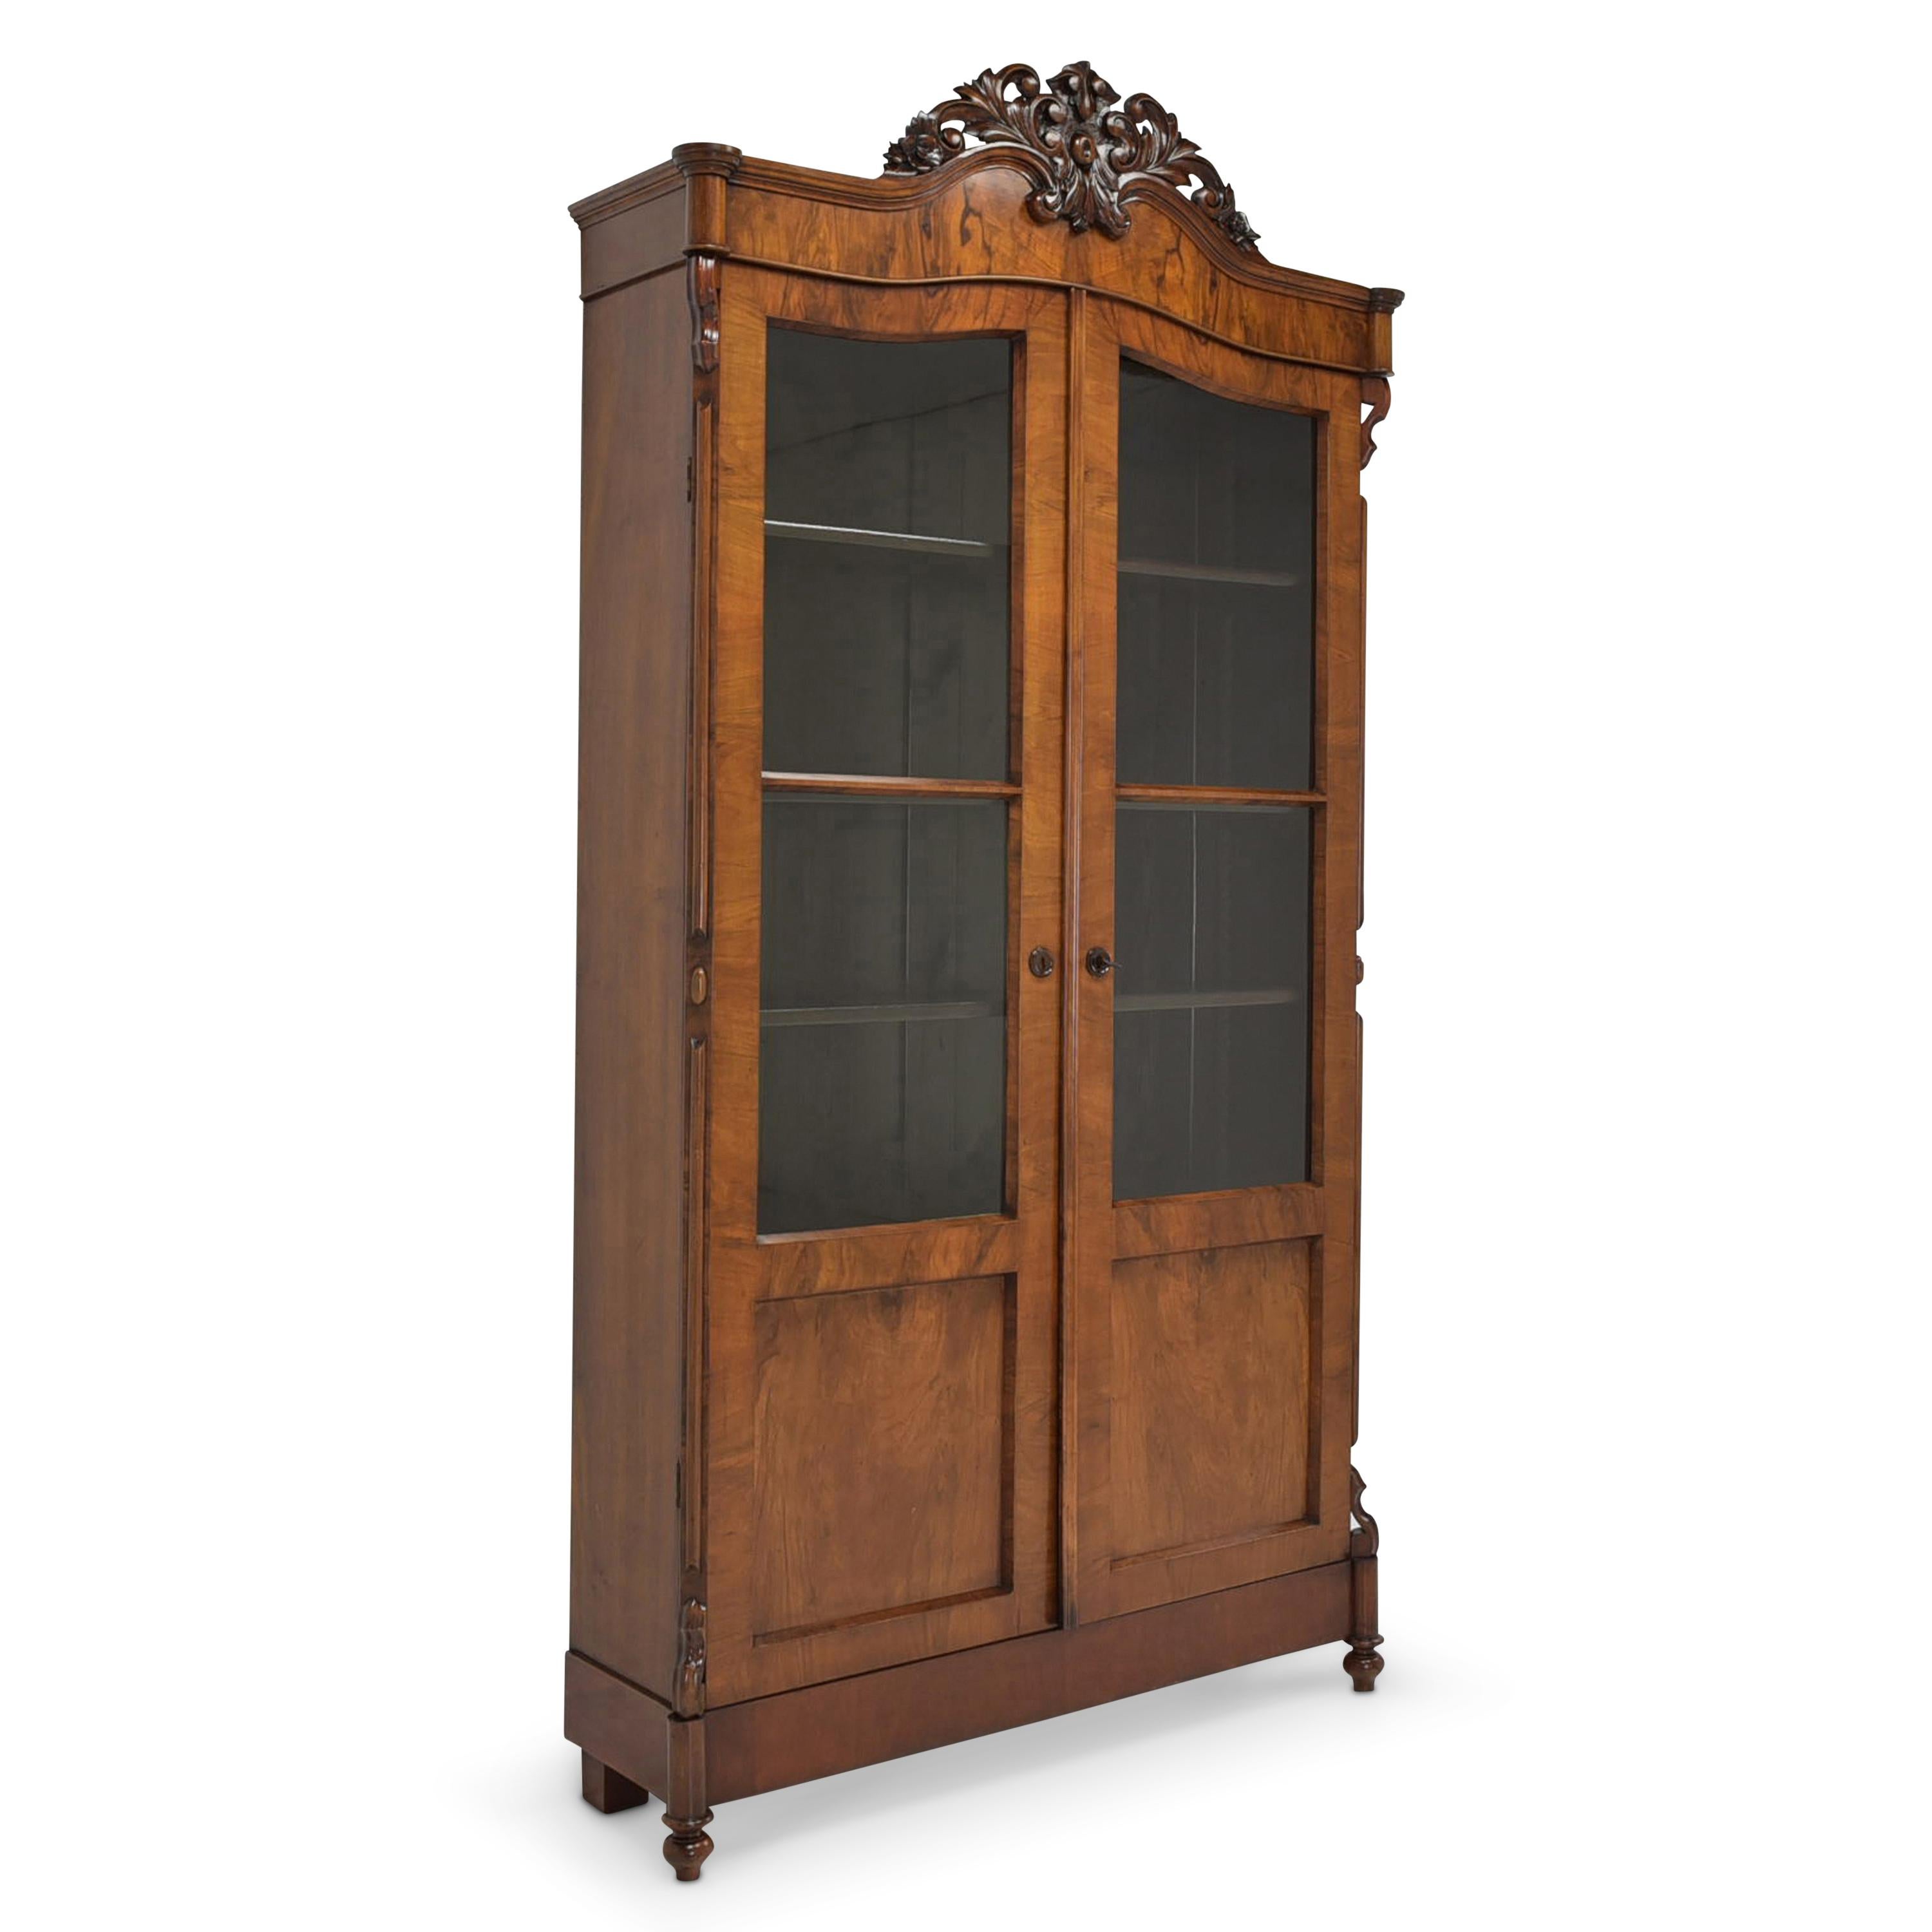 Bookcase restored Louis Philippe around 1870 walnut display cabinet

Features:
Two-door model with 5 shelves
Massive shelves adjustable in height
Original glazing
Elaborately carved crown
Very nice grain
Very flat model (low depth)
The